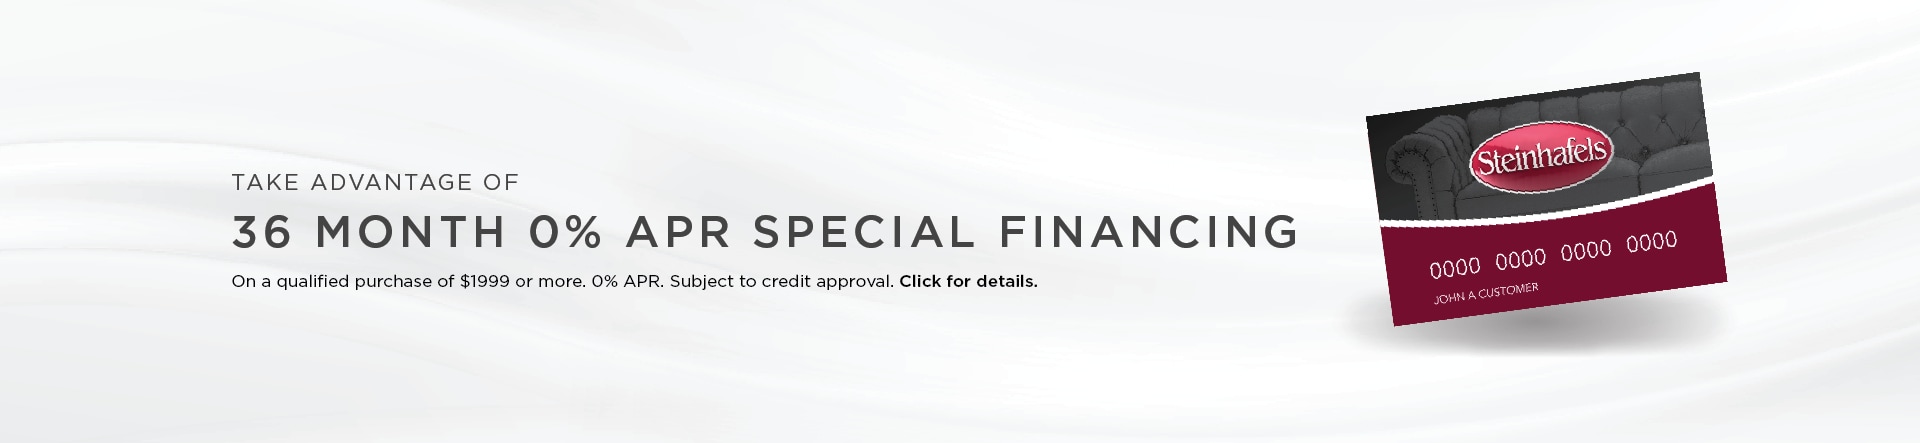 Special 36 Month Financing